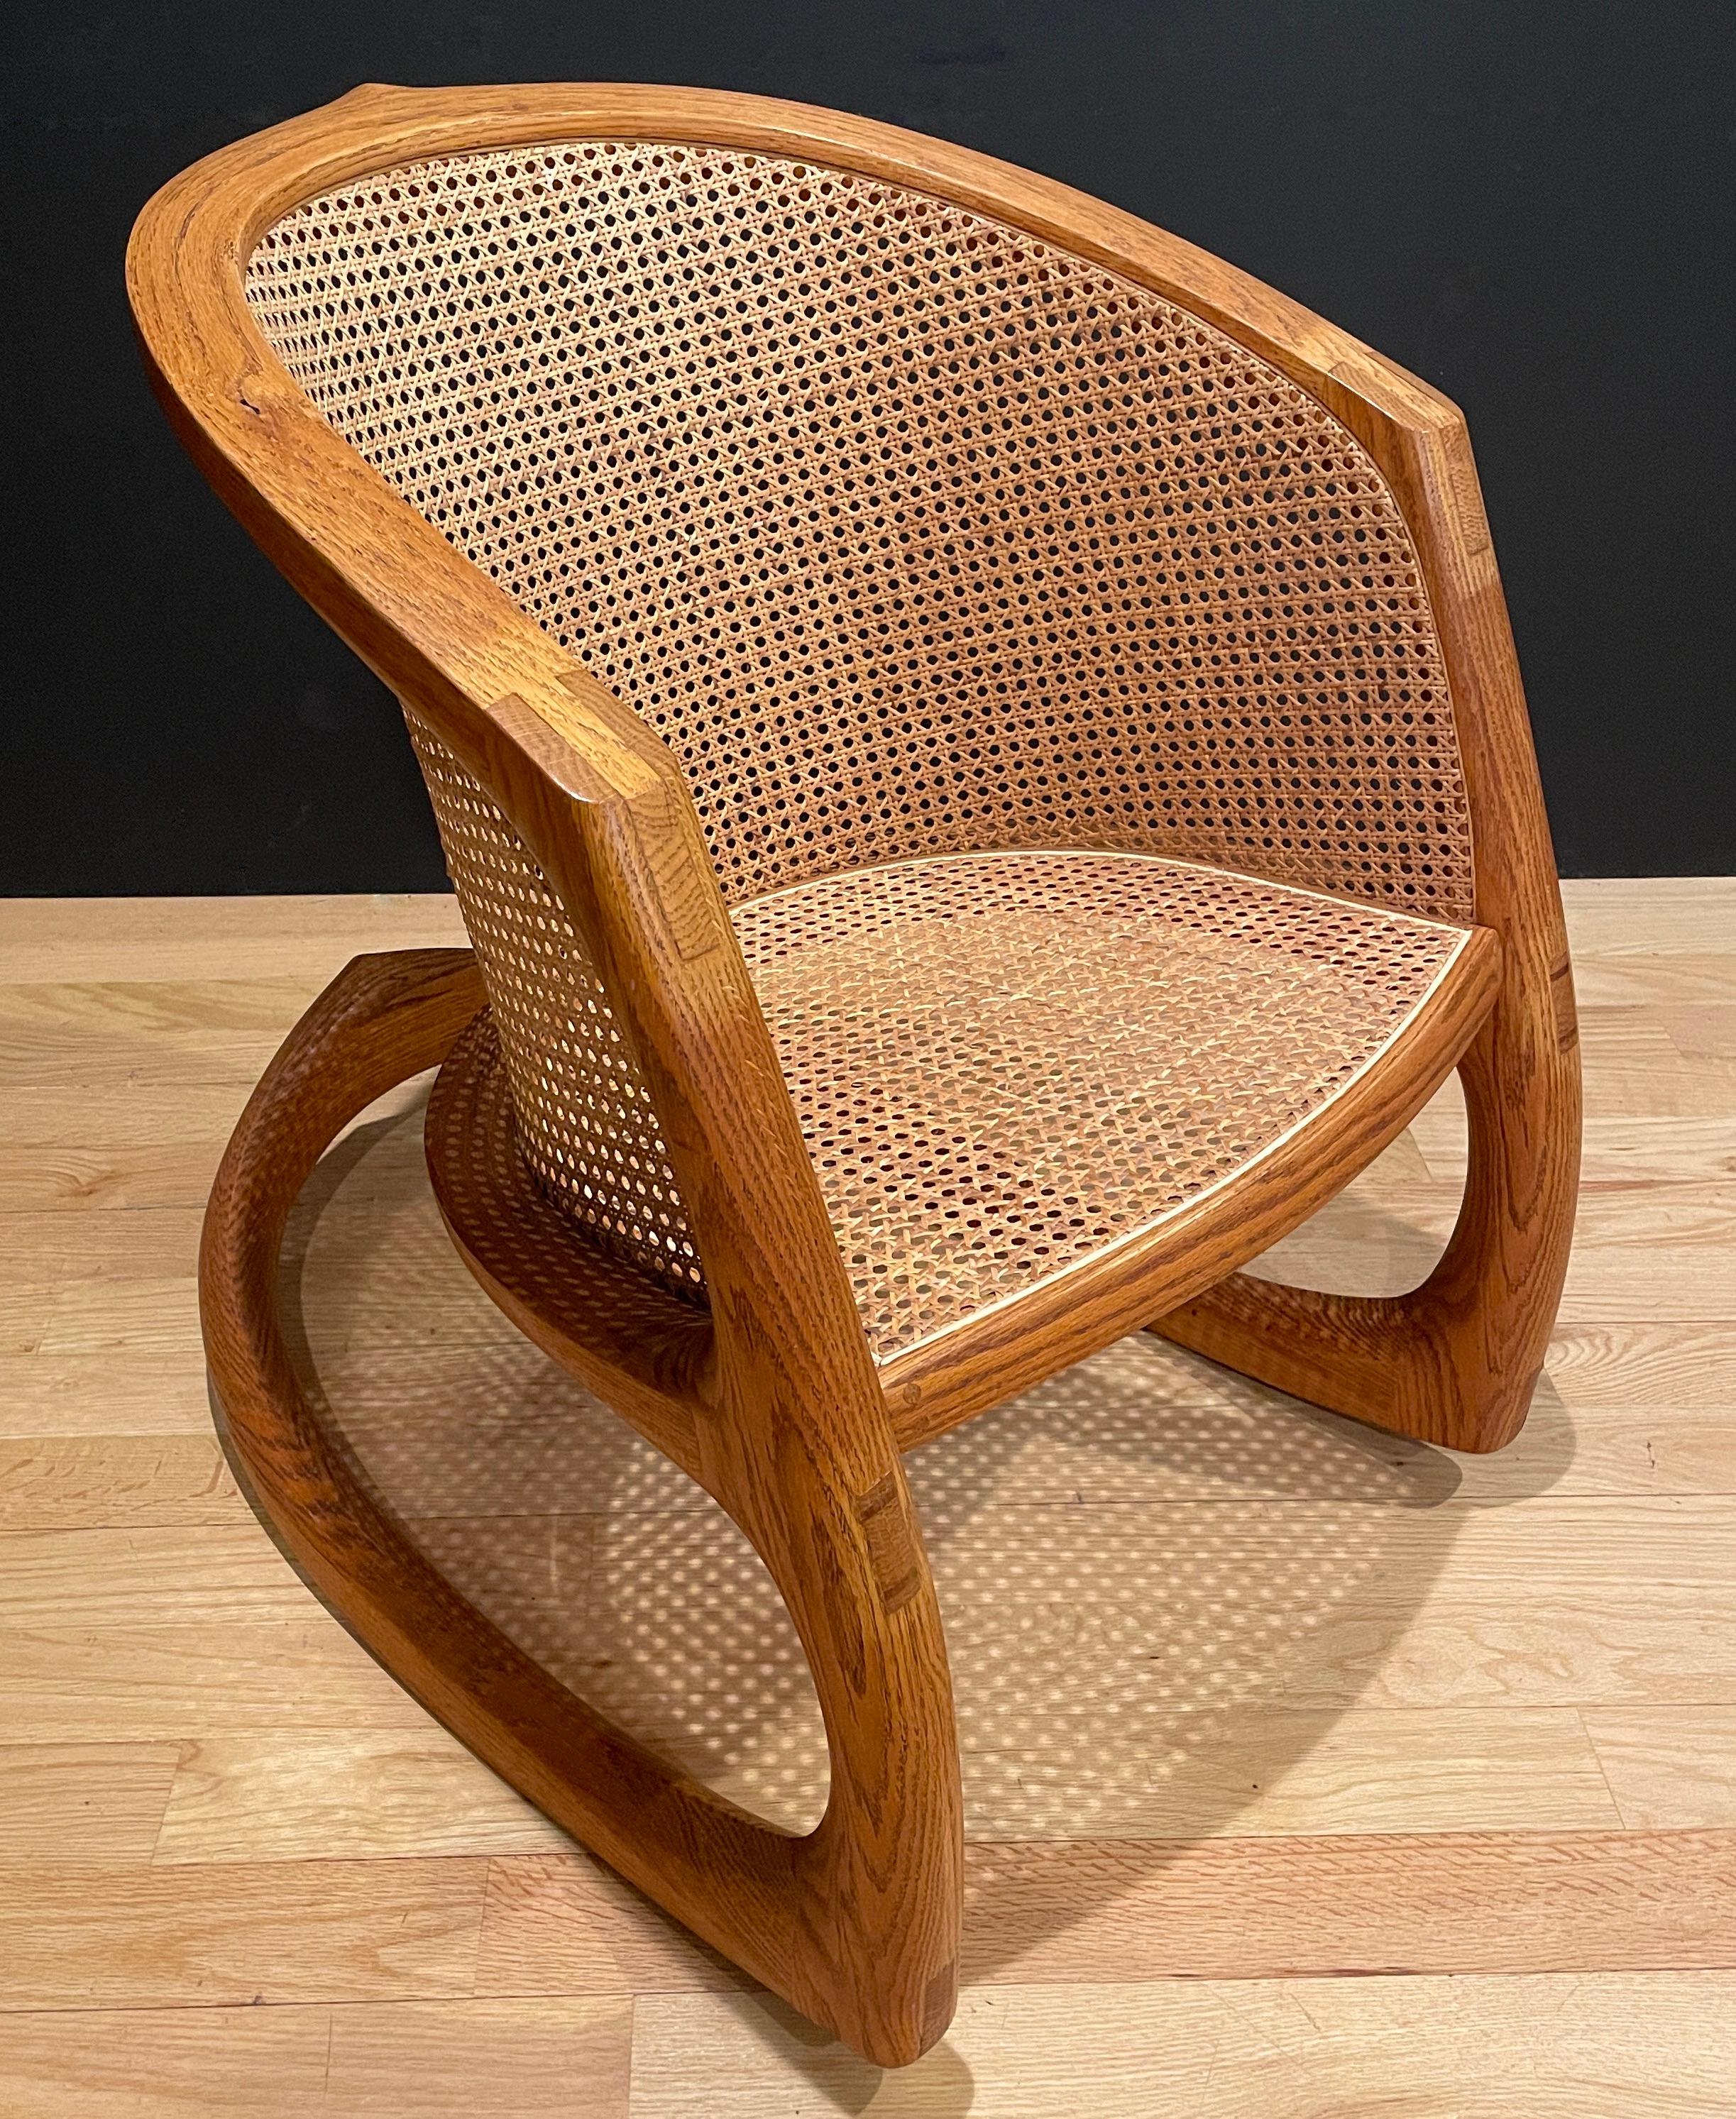 The “Sternum” rocker from David Ebner’s “Wishbone” series. Oak and cane. The entire form uses bent lamination technique.
“David Ebner played a pivotal role in the development of studio furniture during the twentieth and twenty-first centuries.